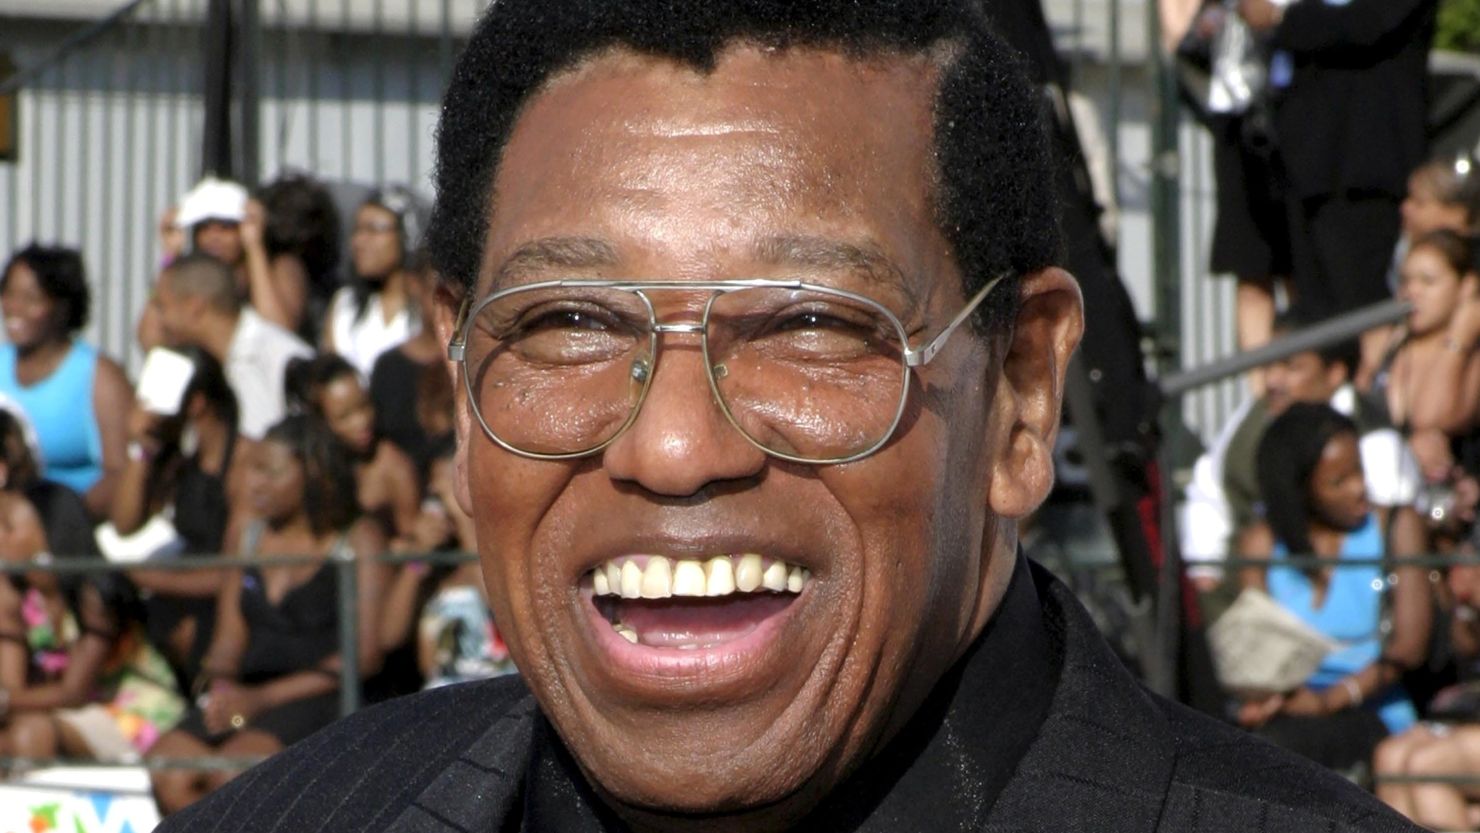 Johnny Brown arrives at the BET Comedy Awards in Pasadena, California, in 2004.